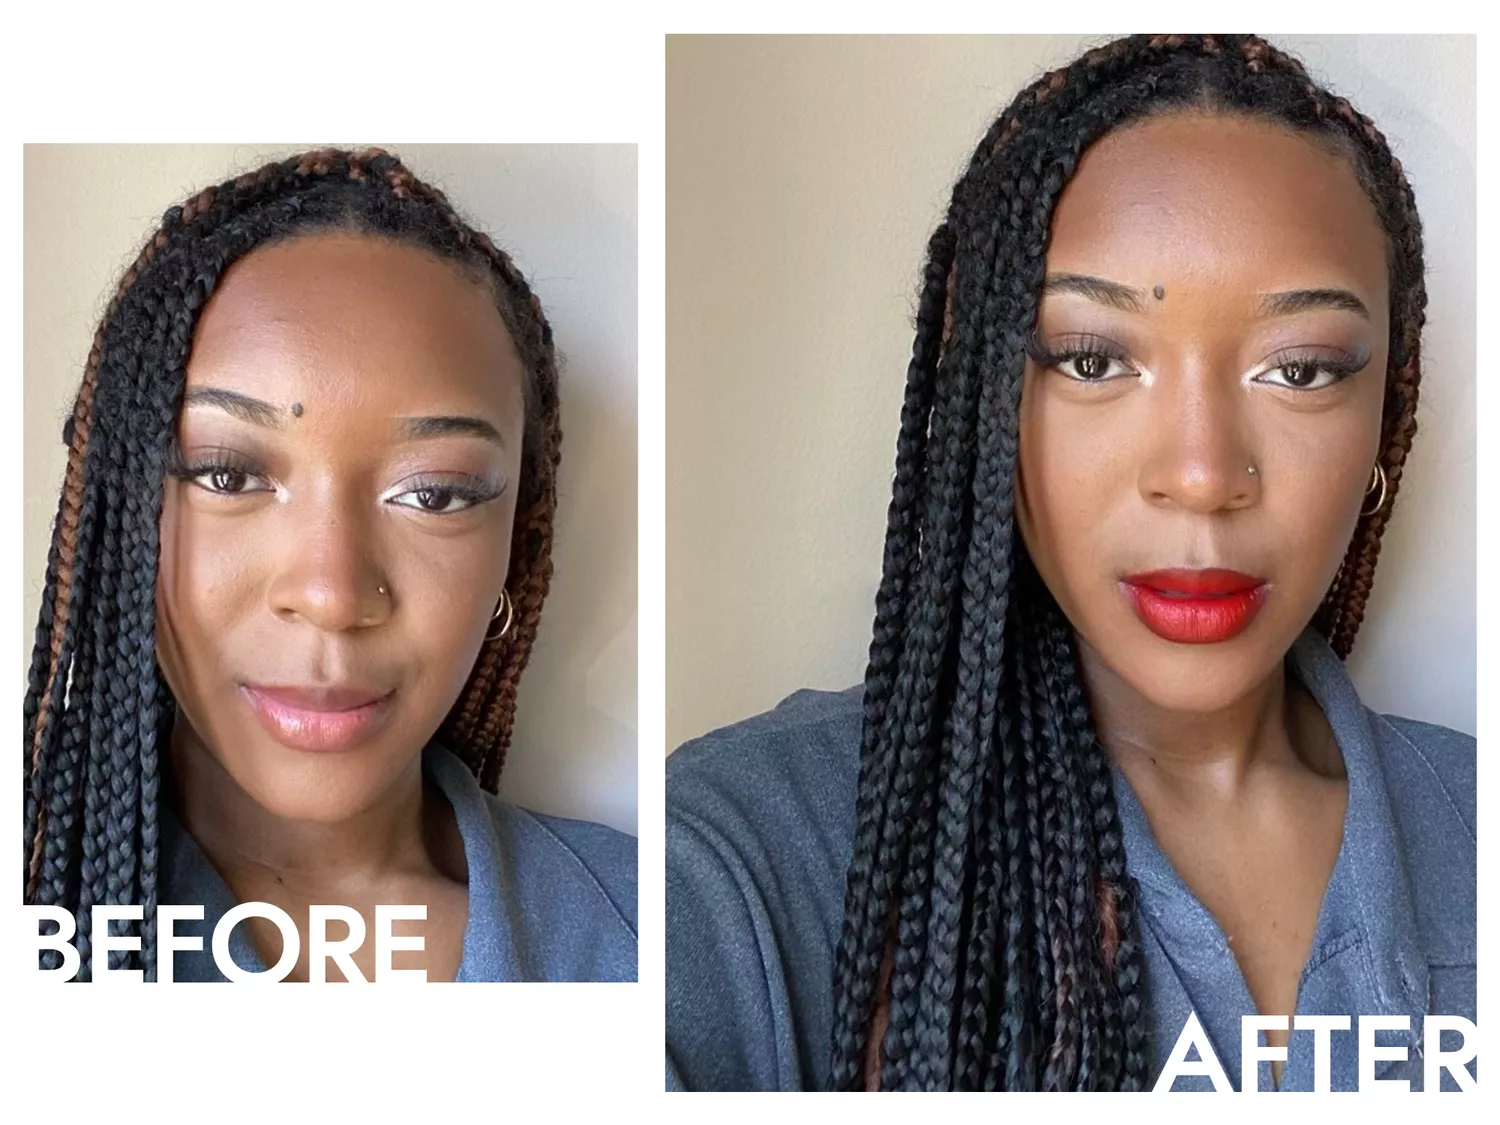 The author before and after applying the Fenty Icon Velvet Liquid Lipstick